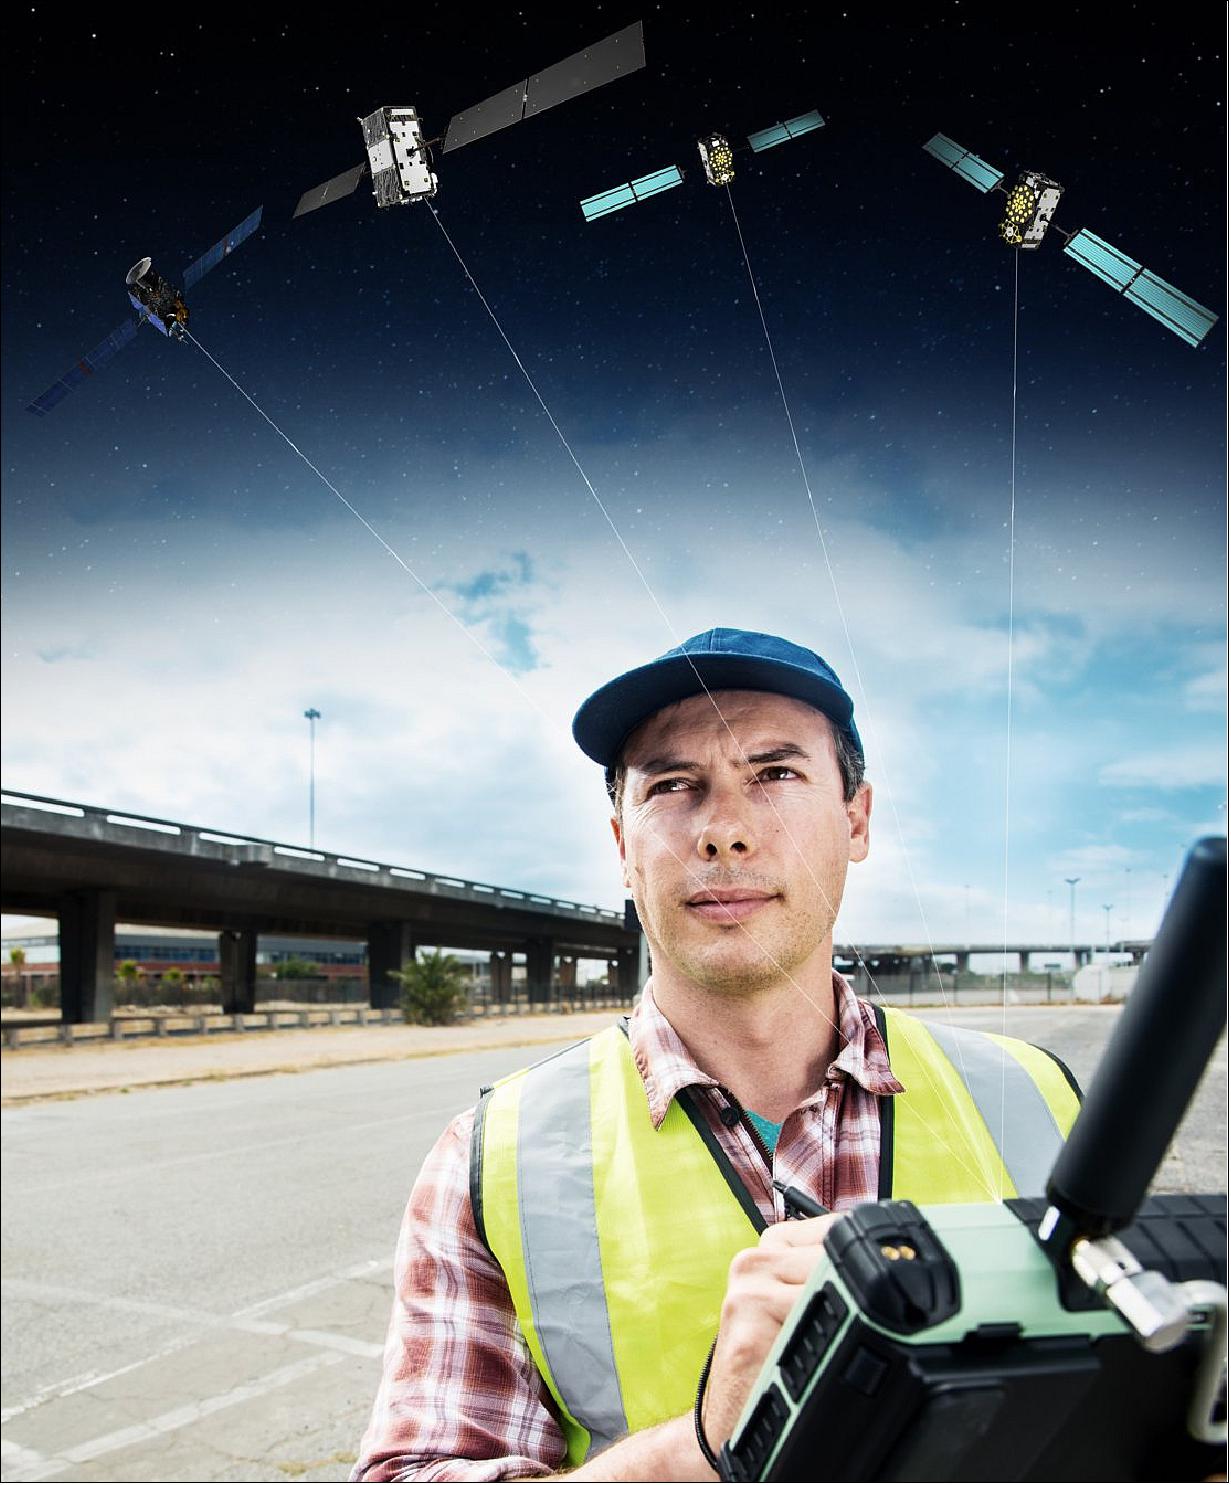 Figure 71: Surveyor using a GNSS device to map urban assets using Galileo and EGNOS (image credit: GSA)